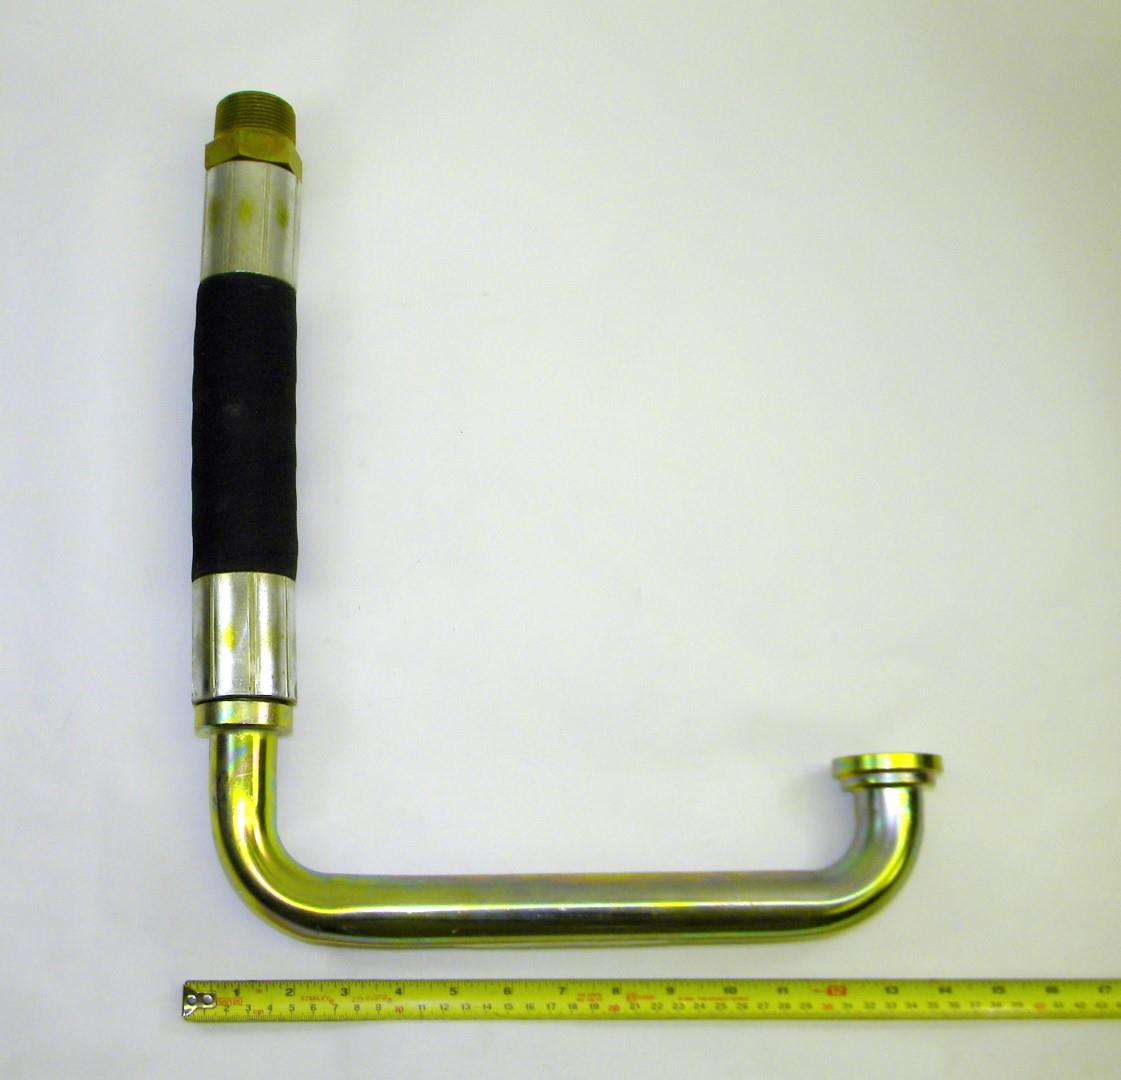 SP-1671 | 4720-01-011-3648 Hydrualic Hose with 90 Degree Flow Angle Elbow for M88 Series Recovery Vehicle. NOS.  (4).JPG